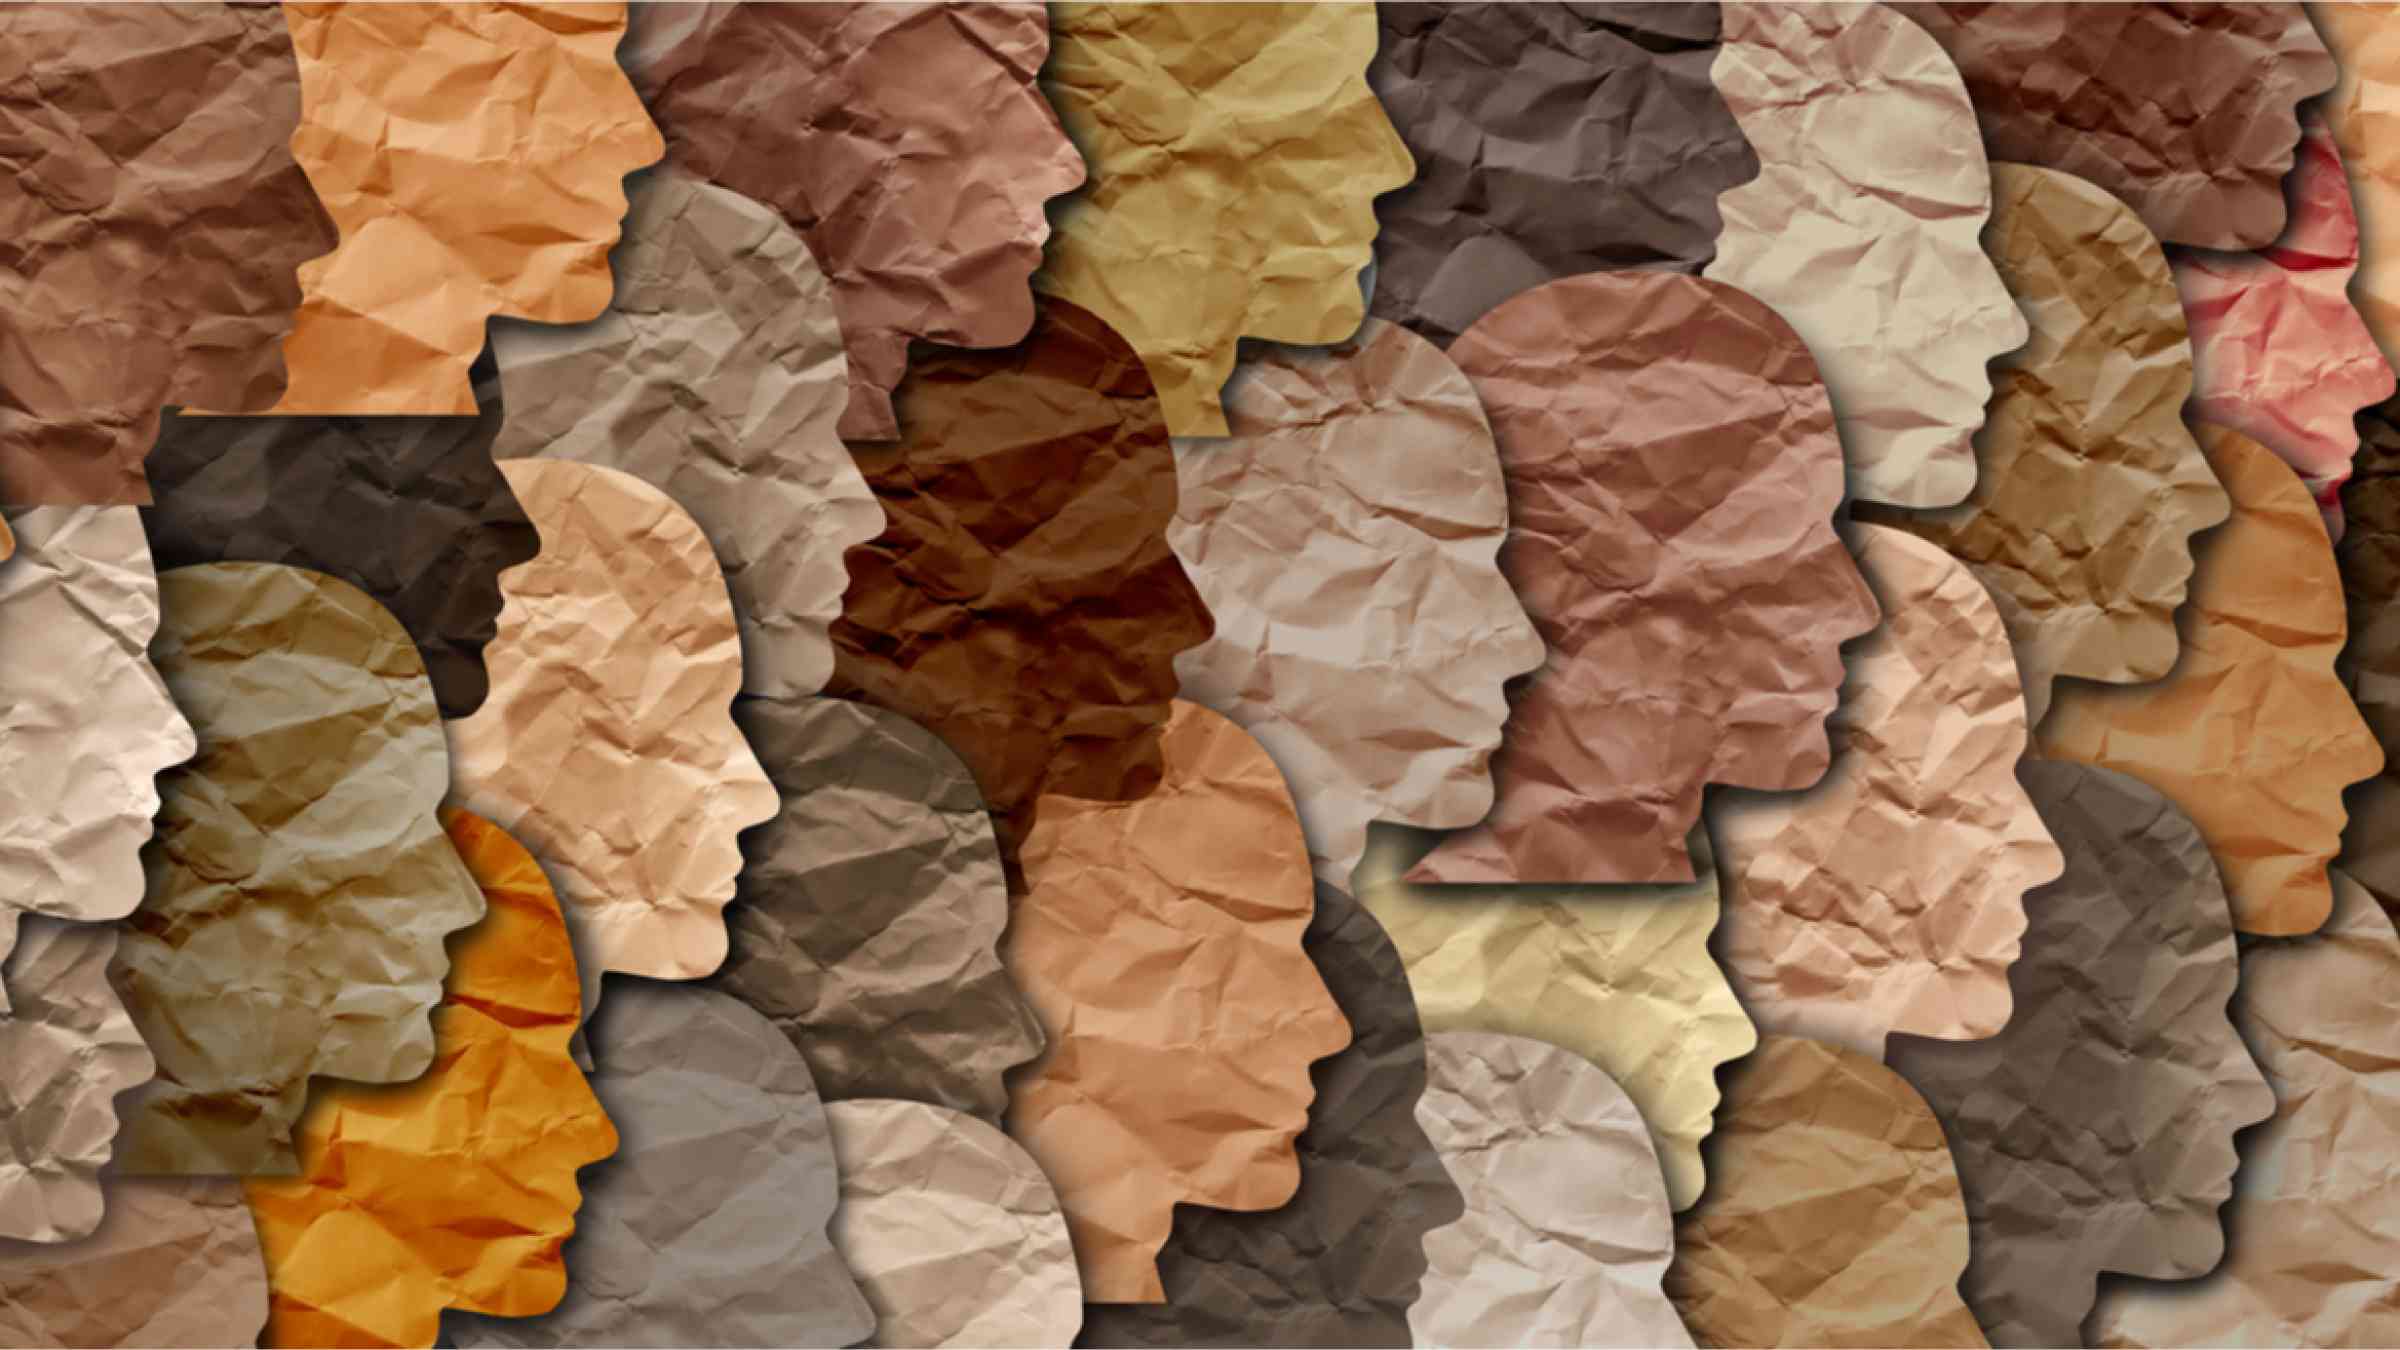 Mosaik with faces cut out of different shades of brown paper.